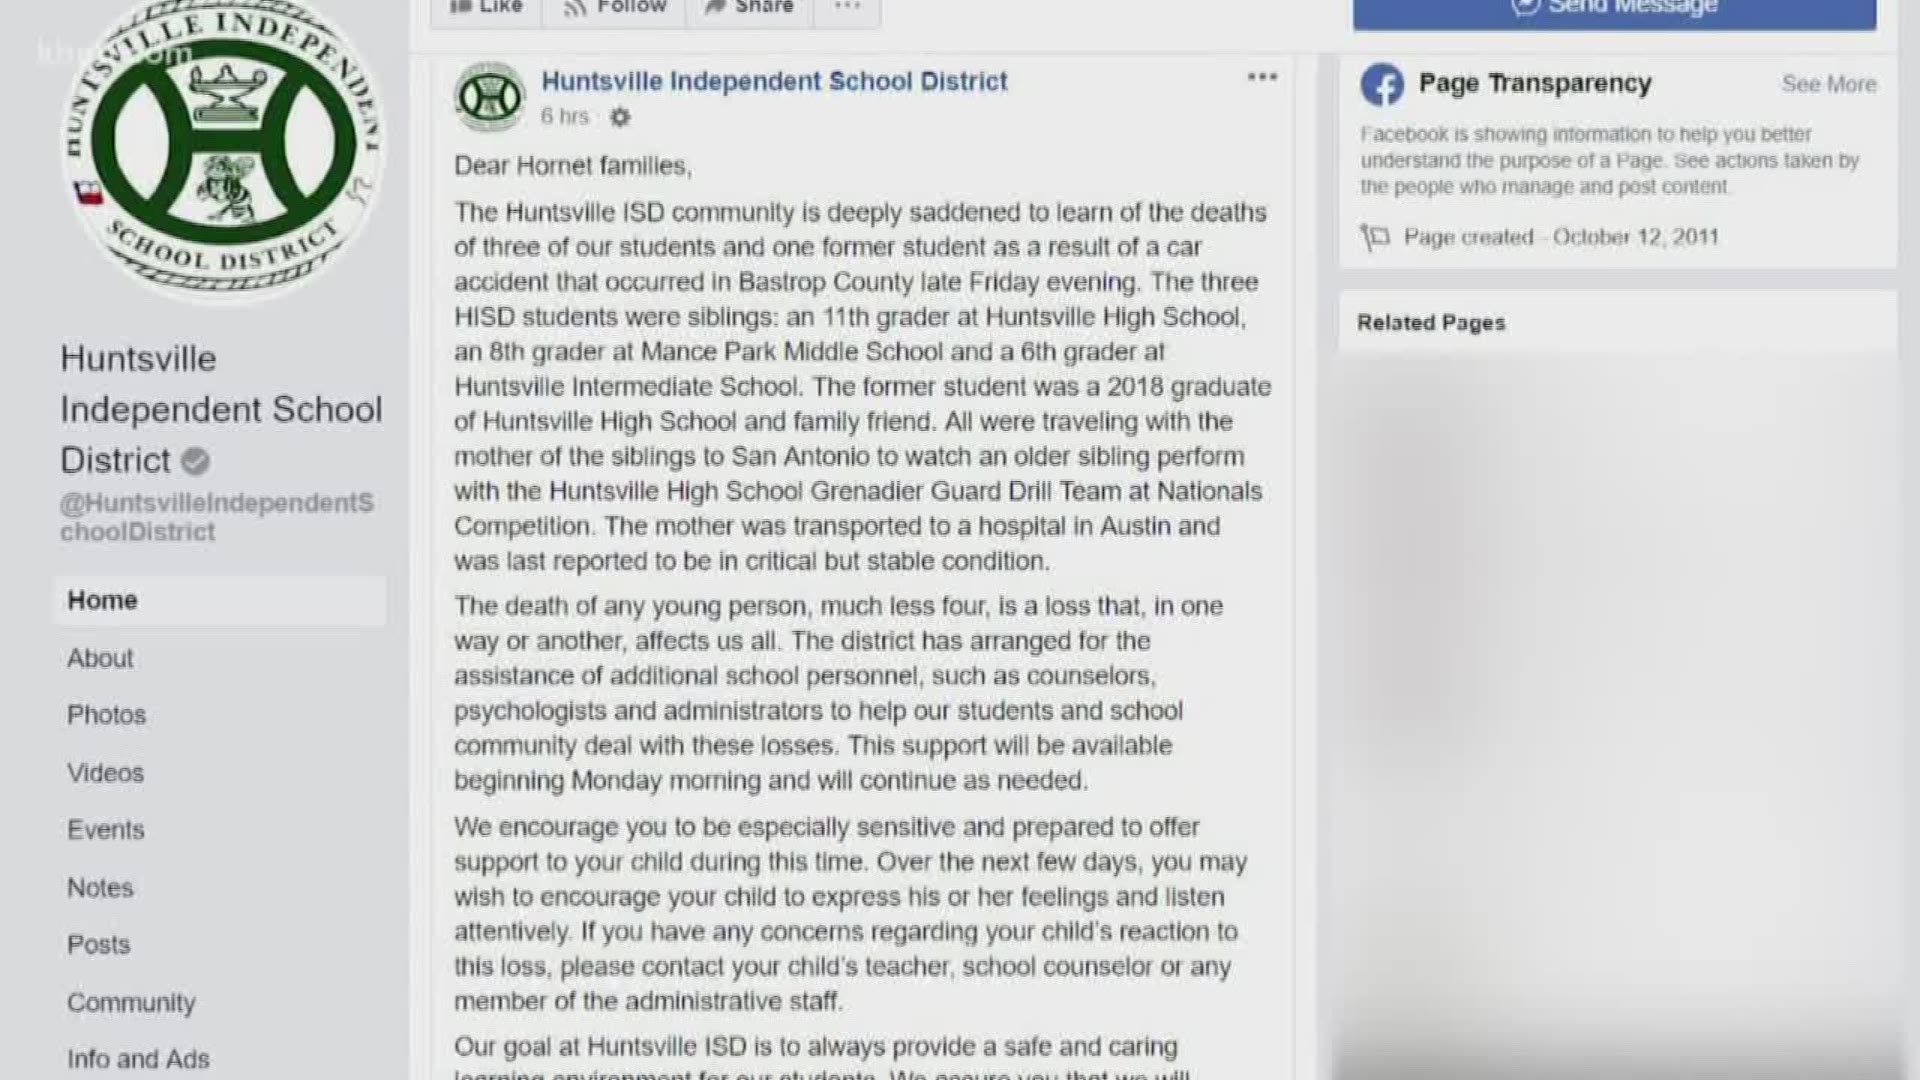 Three Huntsville ISD students and one former student were killed in a car accident in Bastrop County late Friday evening, according to the district.